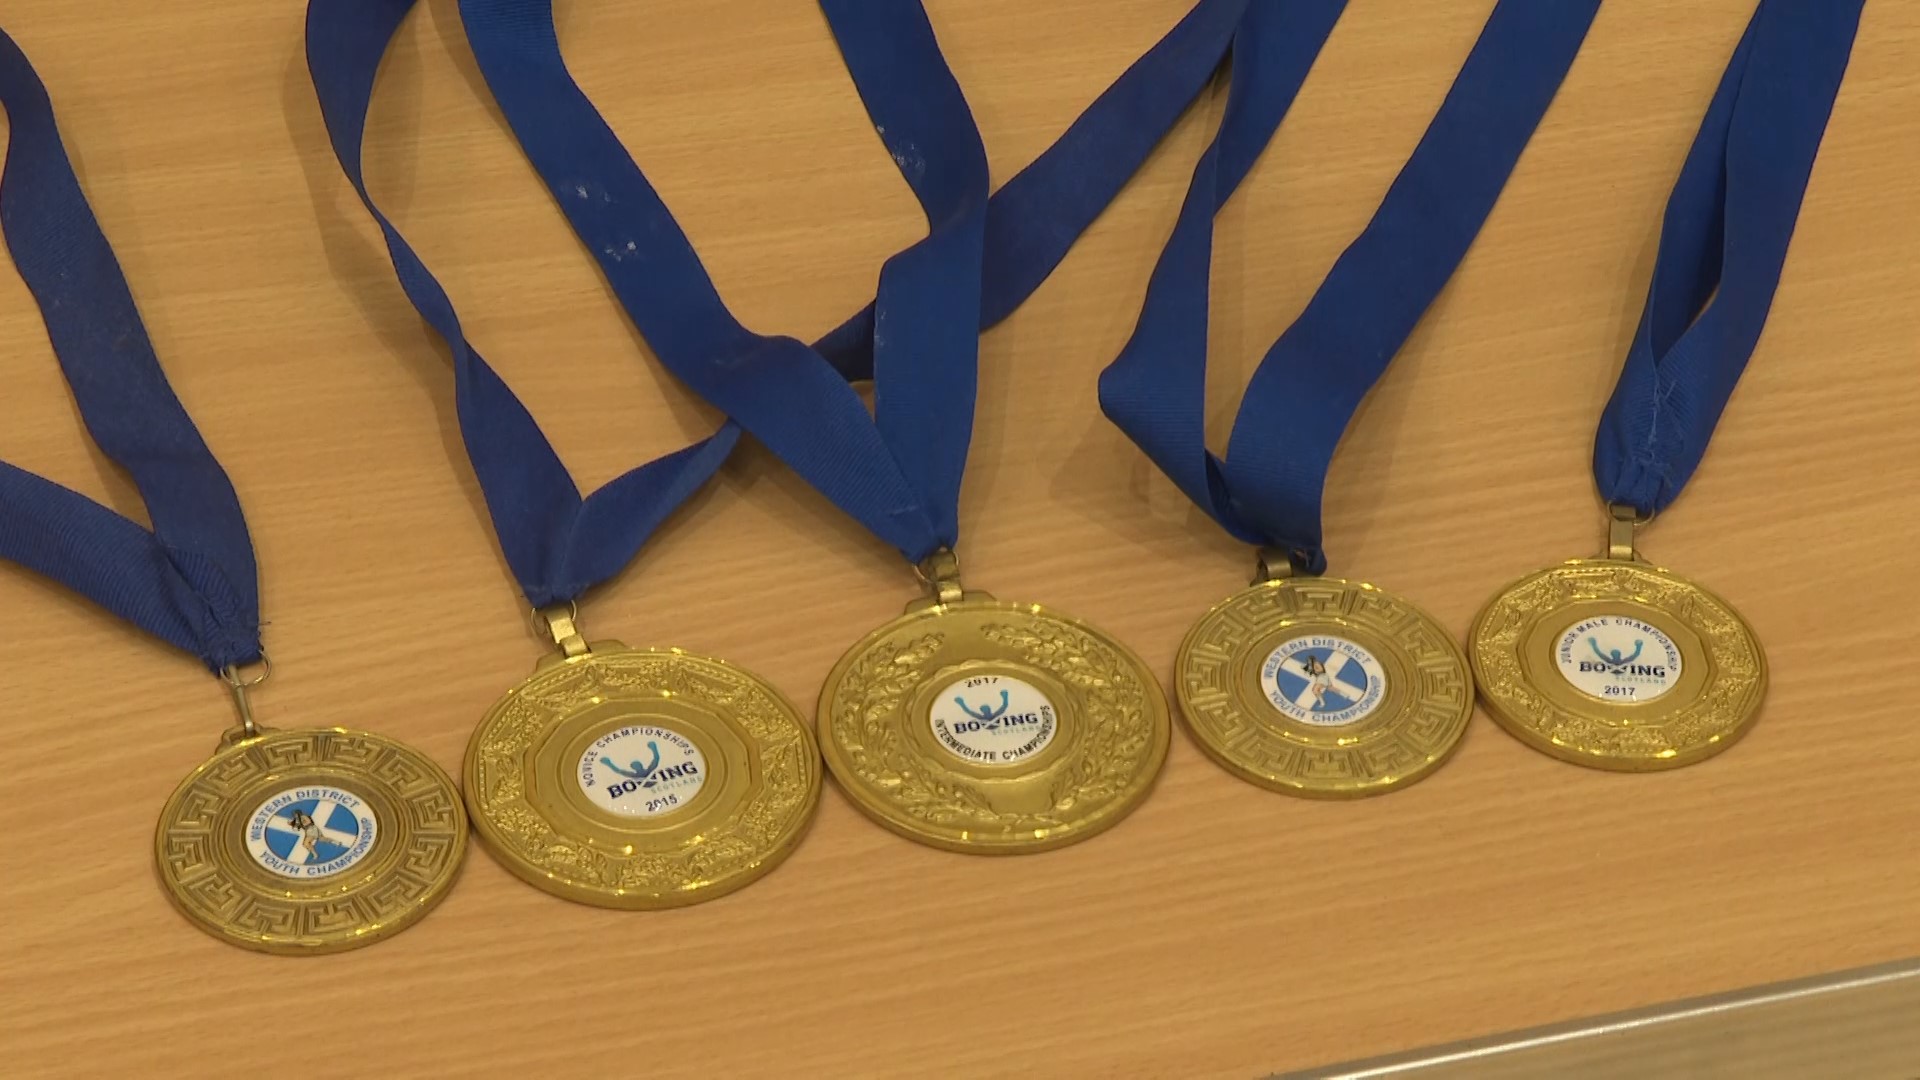 Rhys McCole has won a number of national and regional titles in the sport. (STV News)